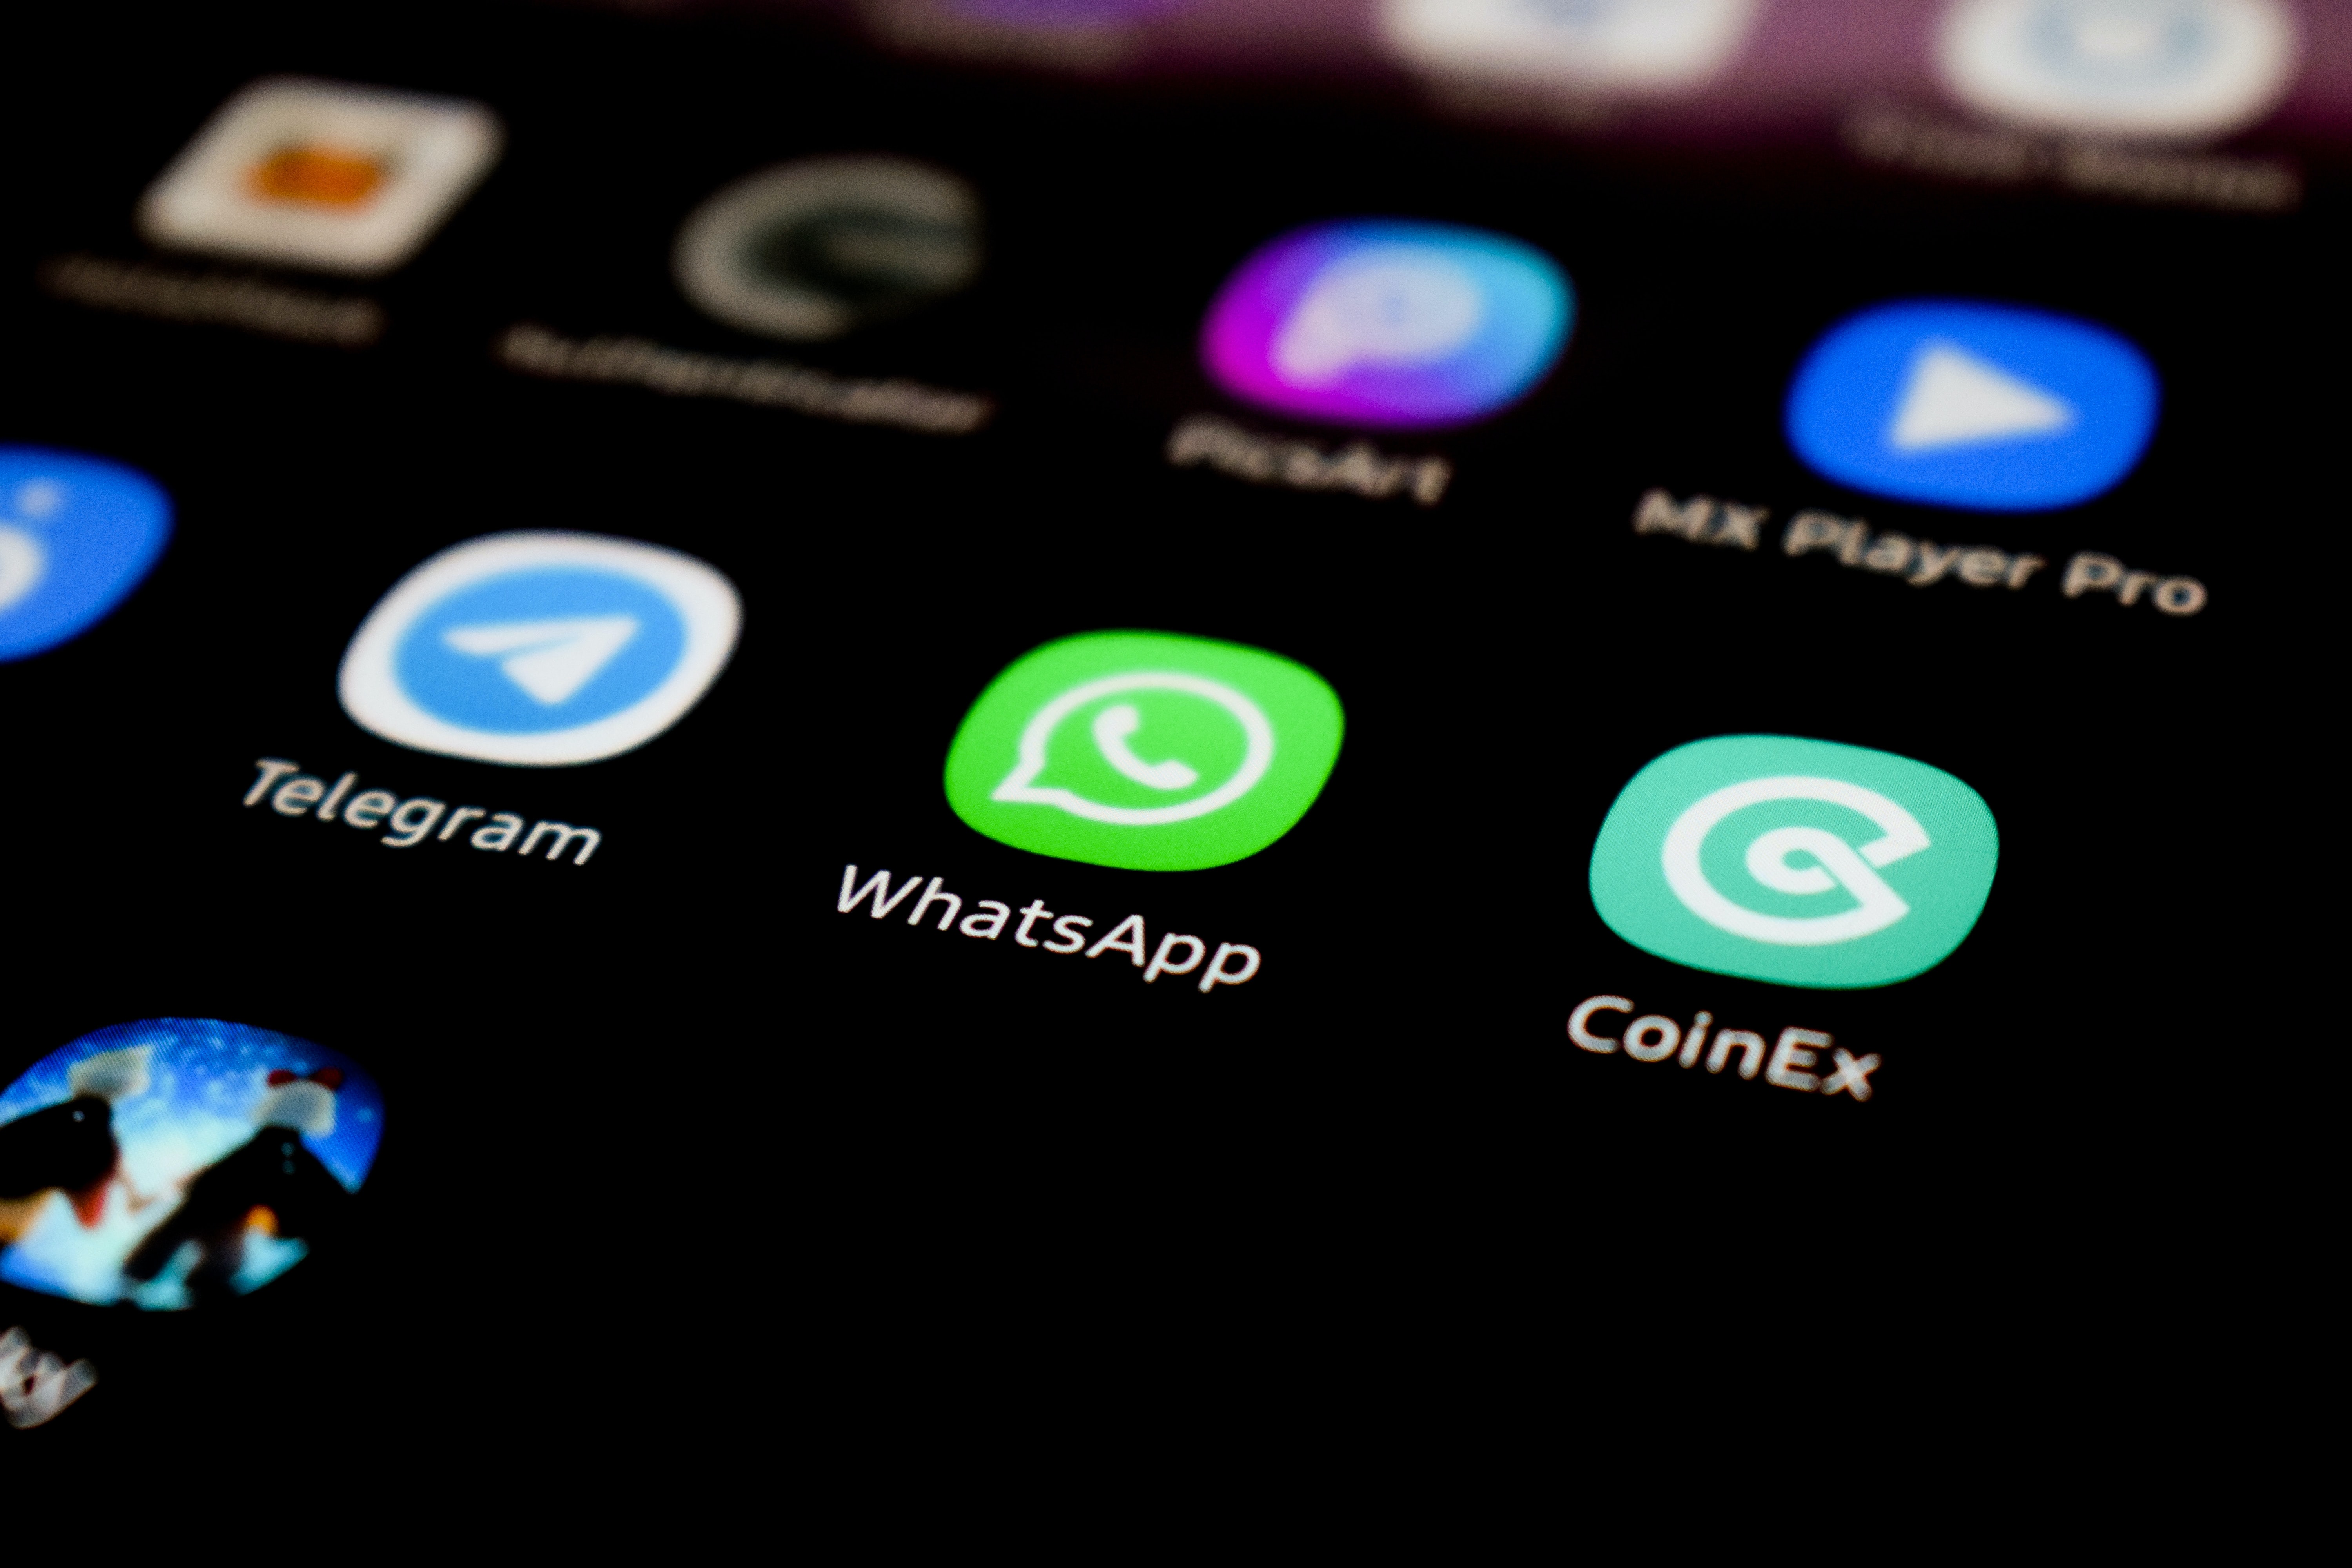 Russian millionaires sent an alert message so that WhatsApp users would stay away from the app.